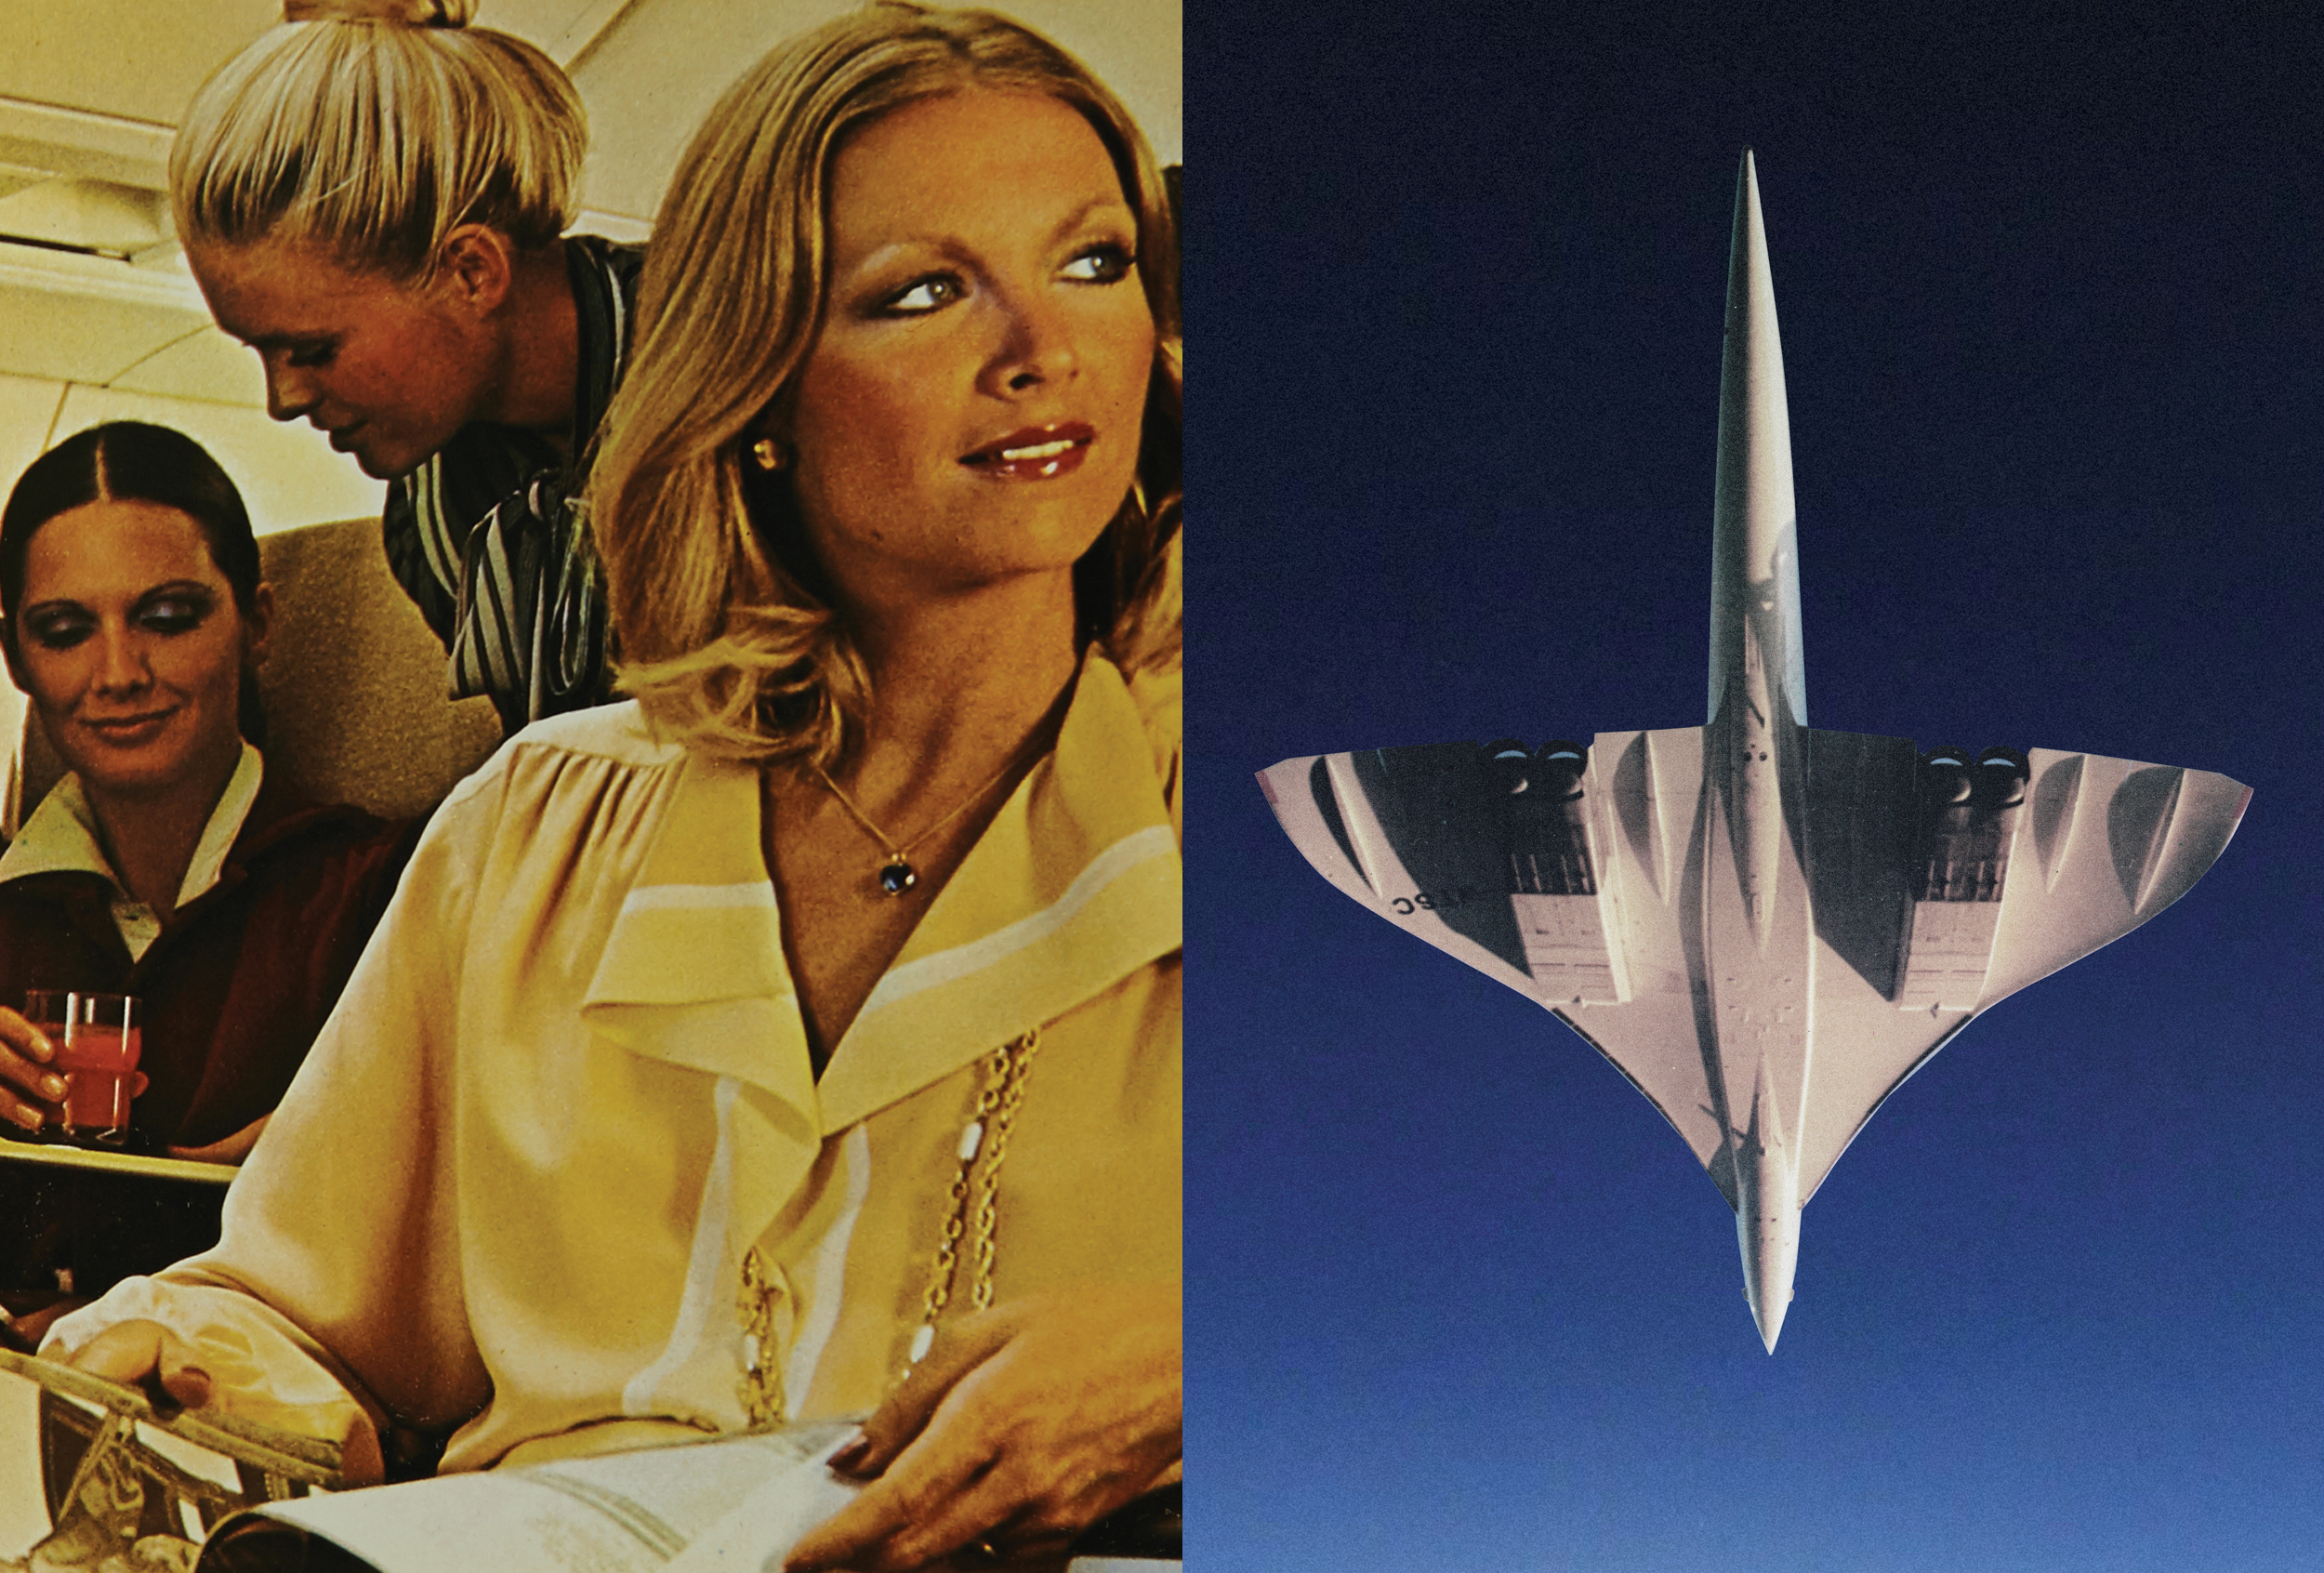 A photograph of a woman aboard the Concorde airliner, showcasing the elite style and design of the aircraft's passengers. The right side shows an image of the underside of the Concorde, emphasizing it's unique delta wings and highly streamlined body.